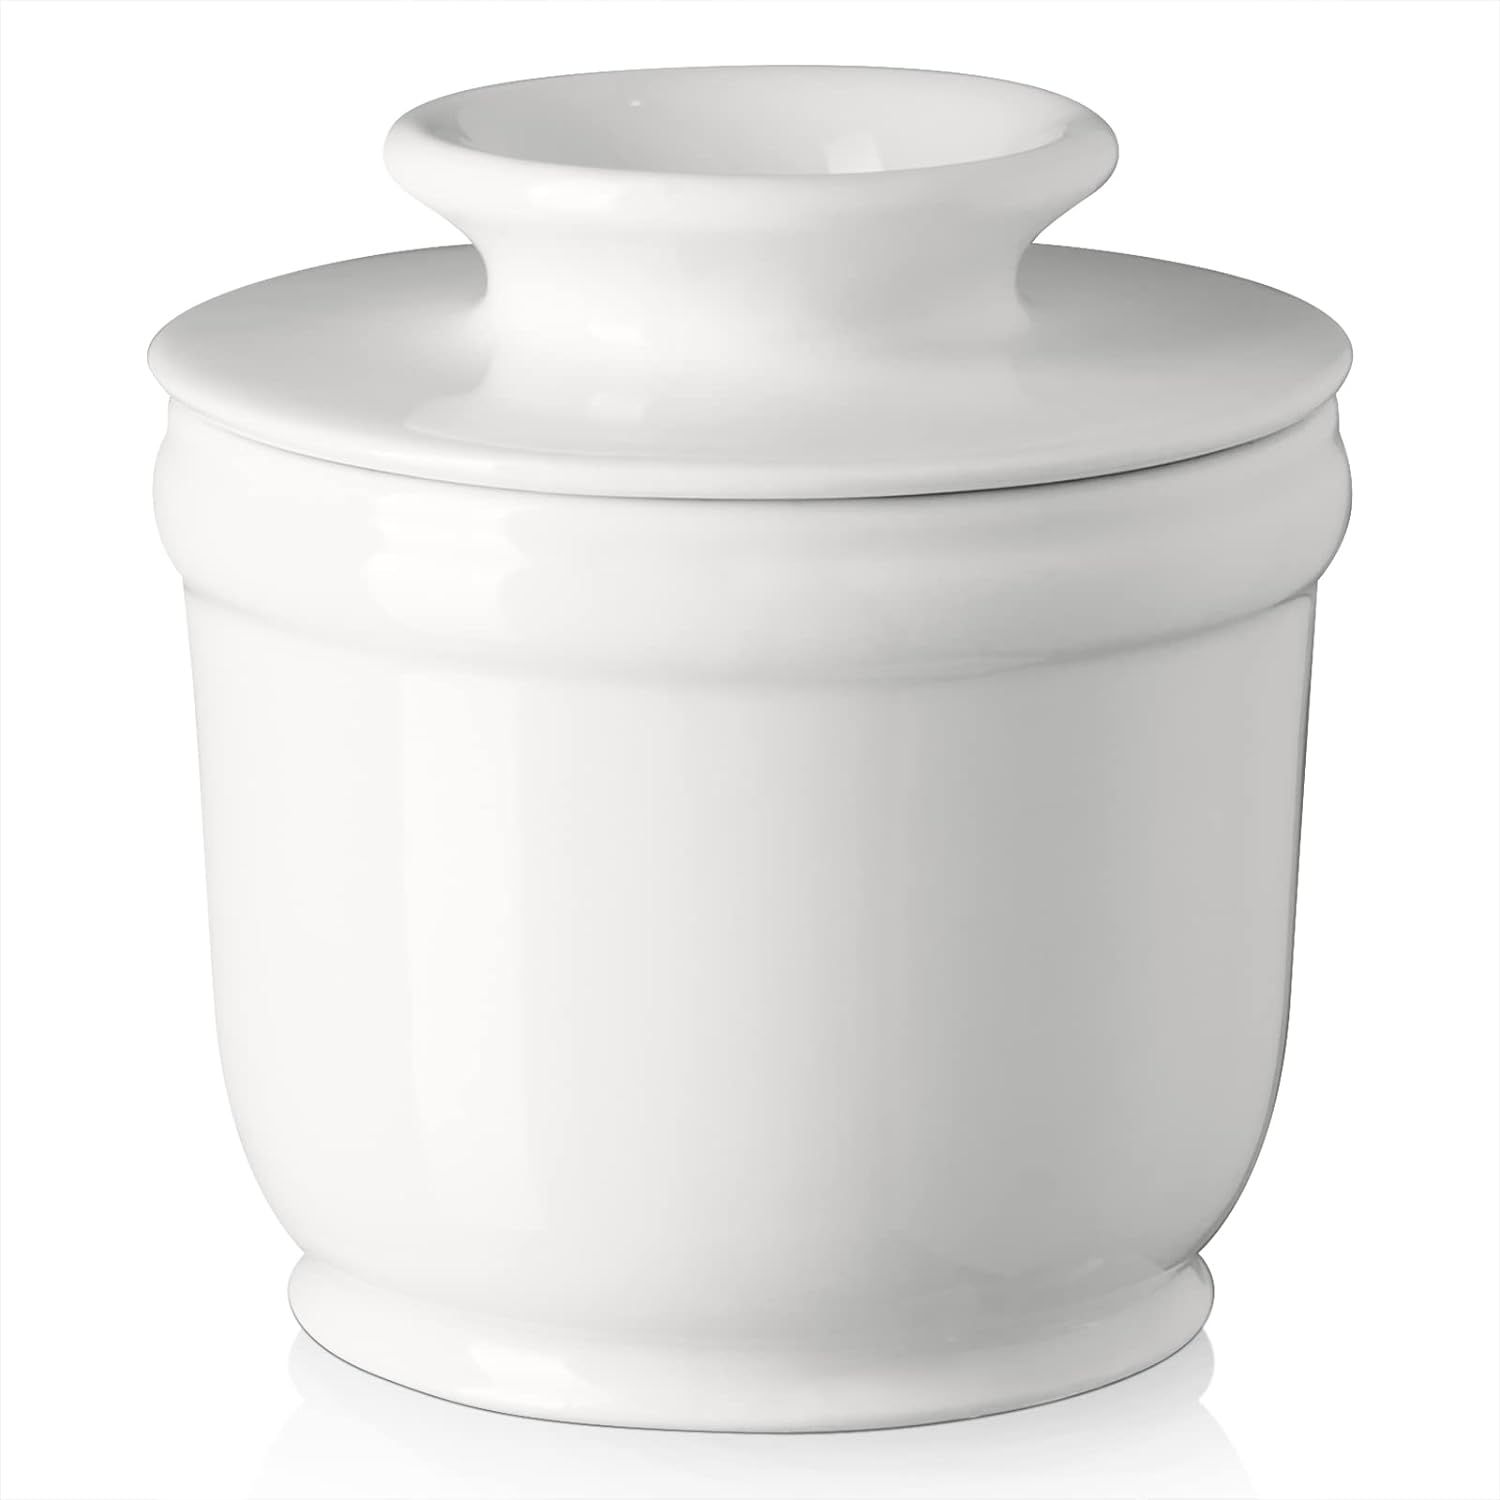 DOWAN Porcelain Butter Crock, French Butter Dish for Fresh Spreadable Butter, Butter Keeper with ... | Amazon (US)